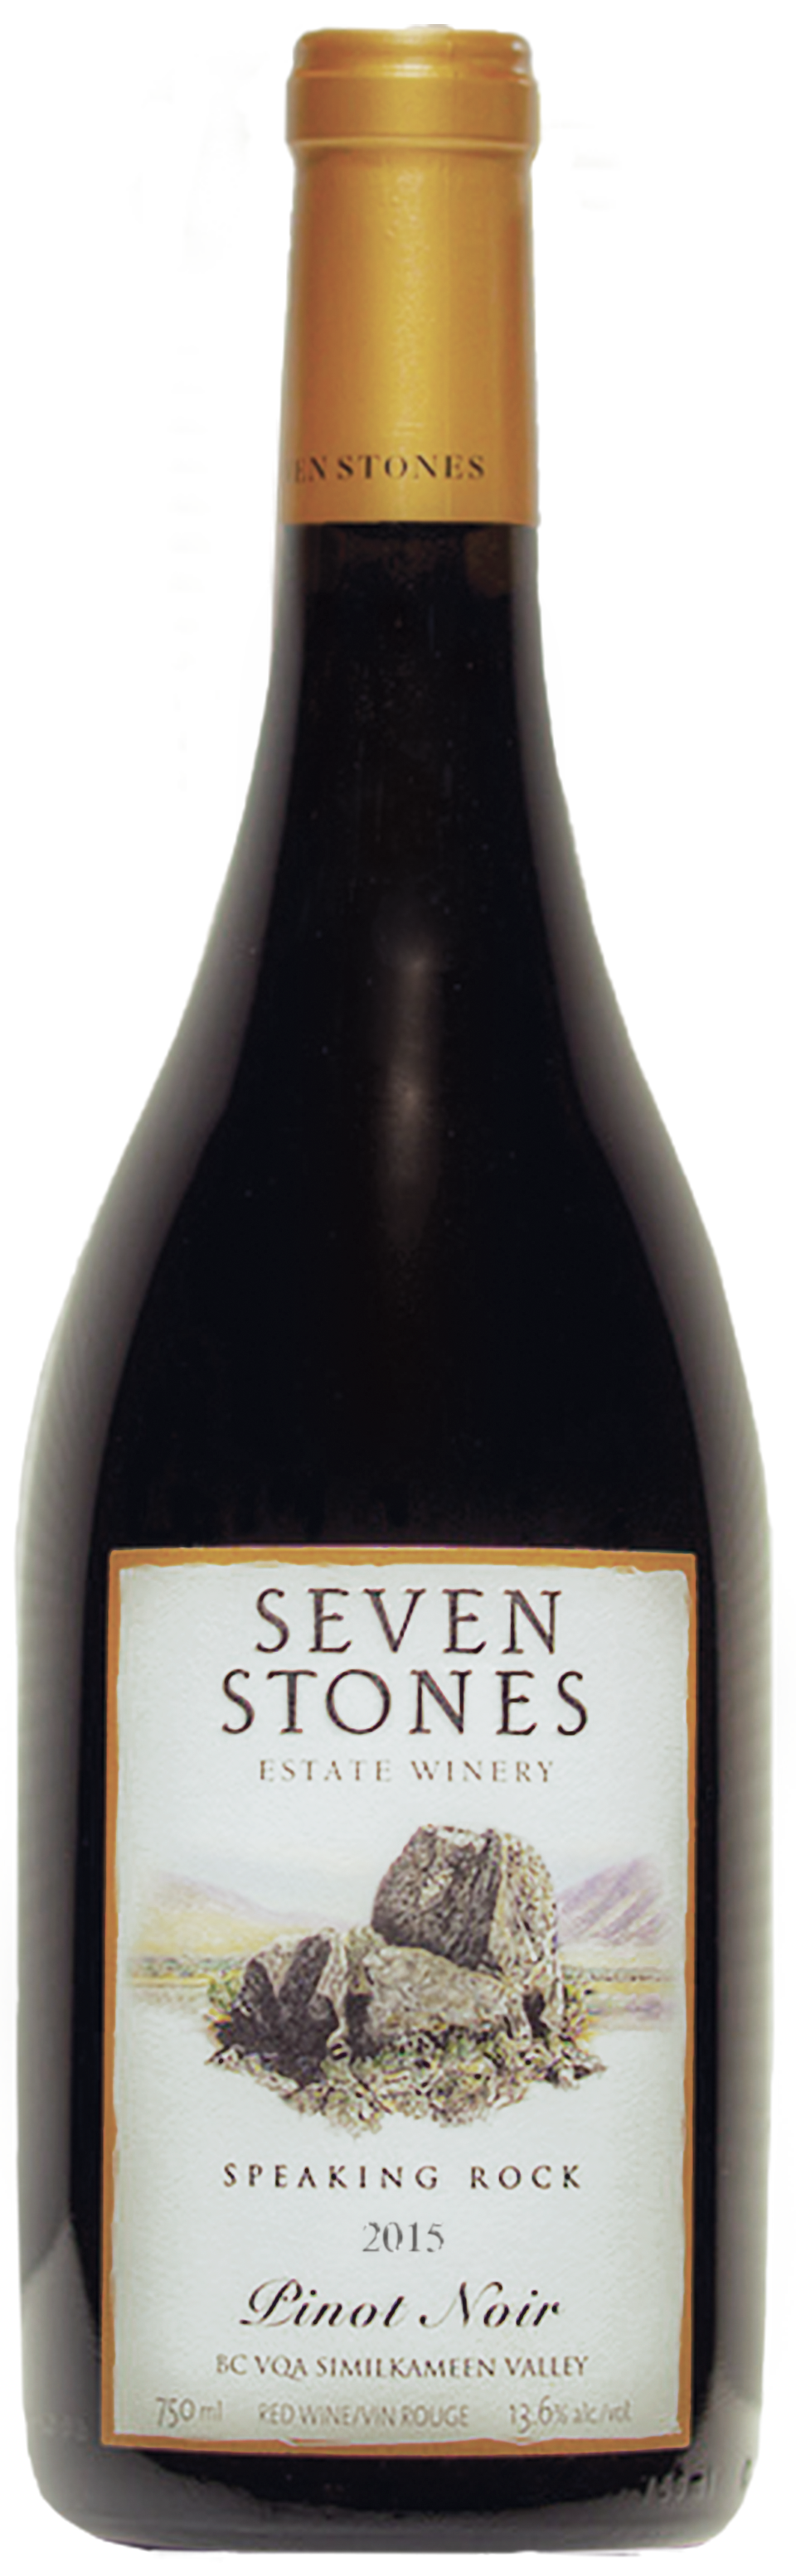 Product Image for 2015 Pinot Noir